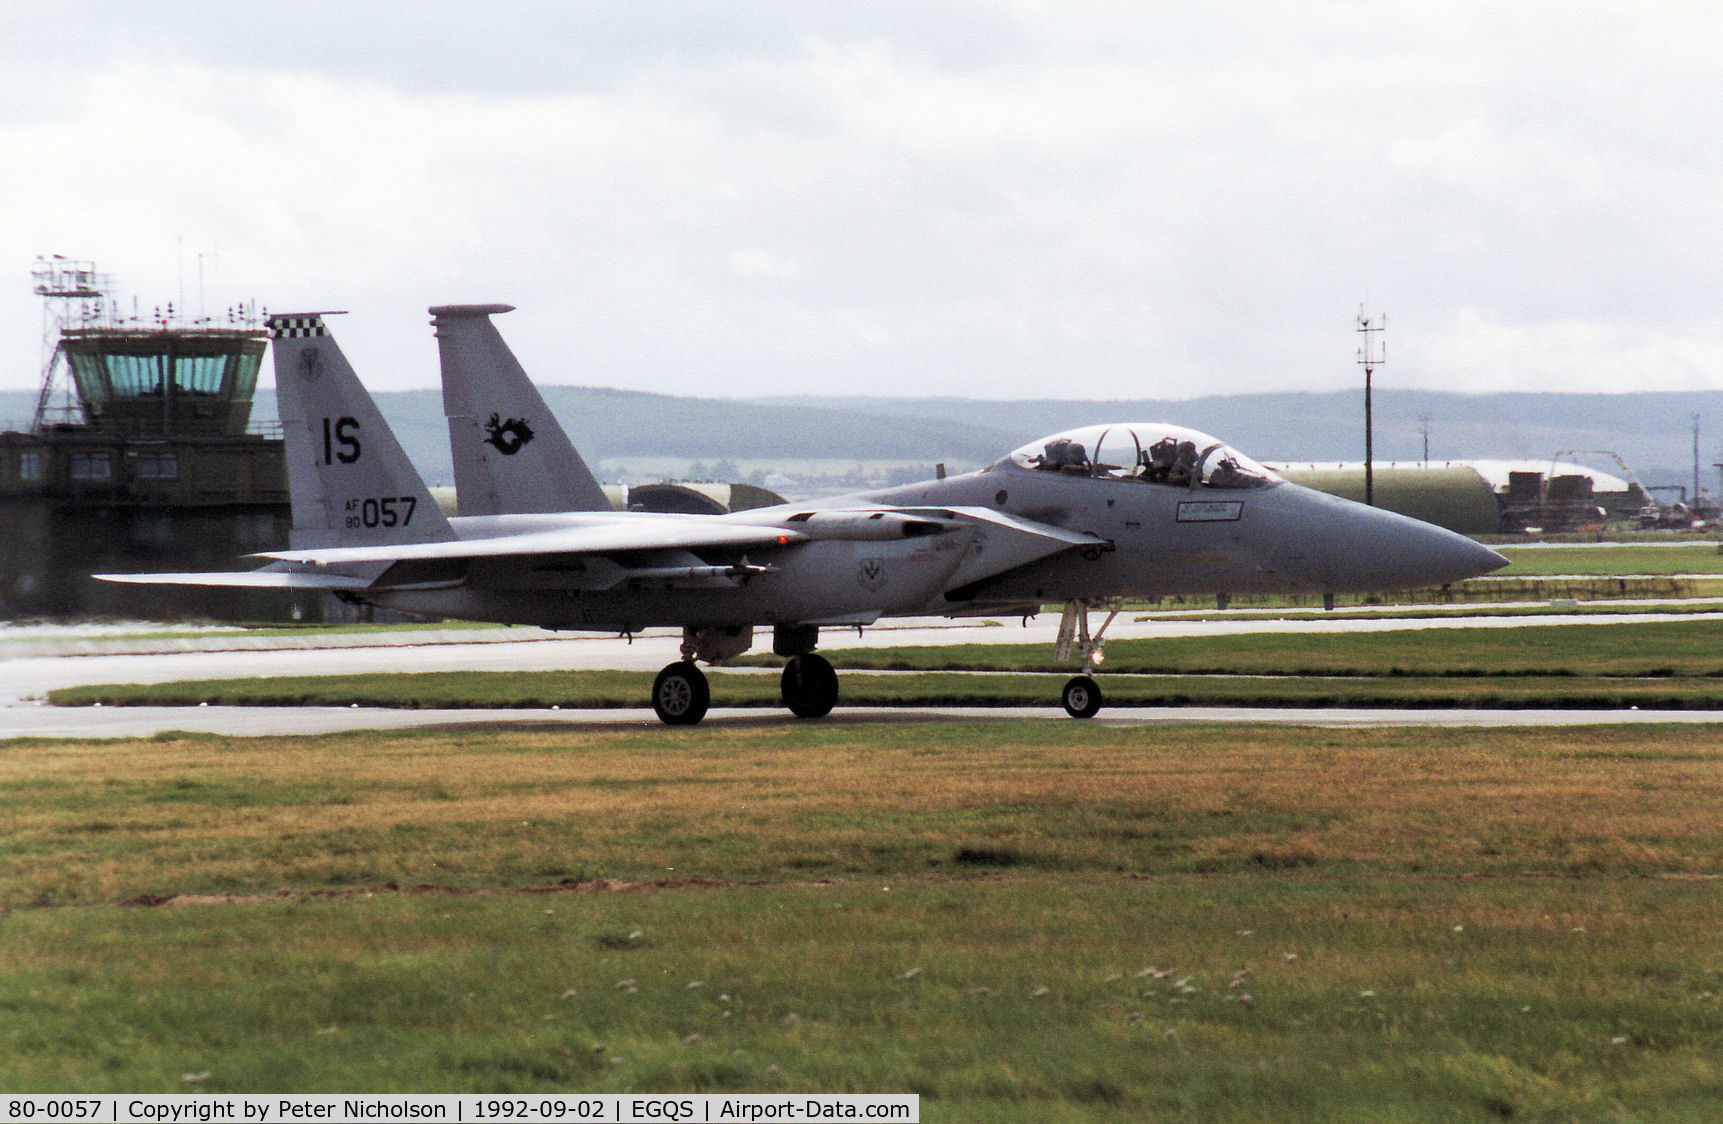 80-0057, 1980 McDonnell Douglas F-15D Eagle C/N 0698/D029, F-15D Eagle of Keflavik's 57th Fighter Squadron taxying to the active runway at RAF Lossiemouth in September 1992.